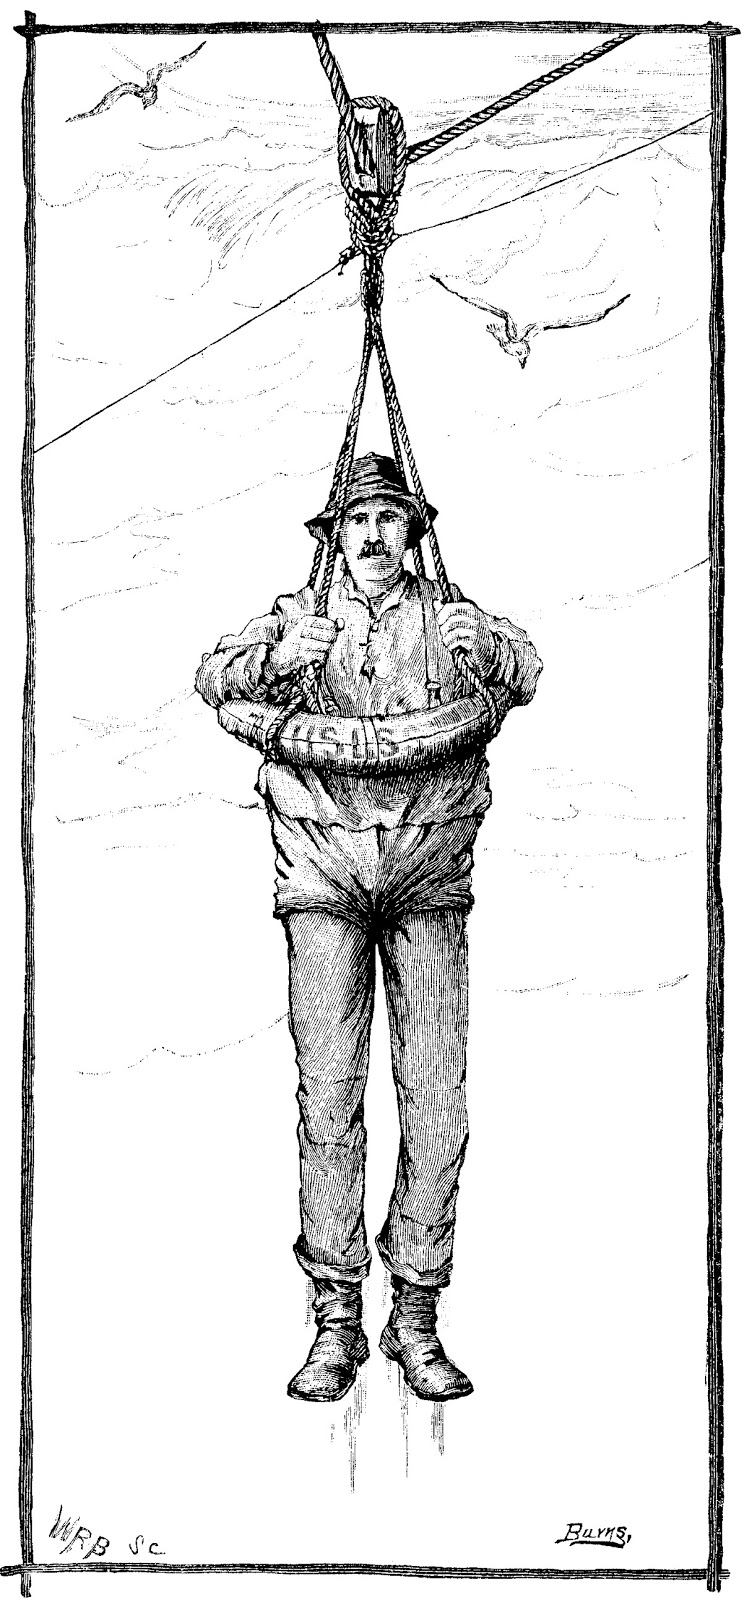 Rescued In Breeches Buoy [1899]